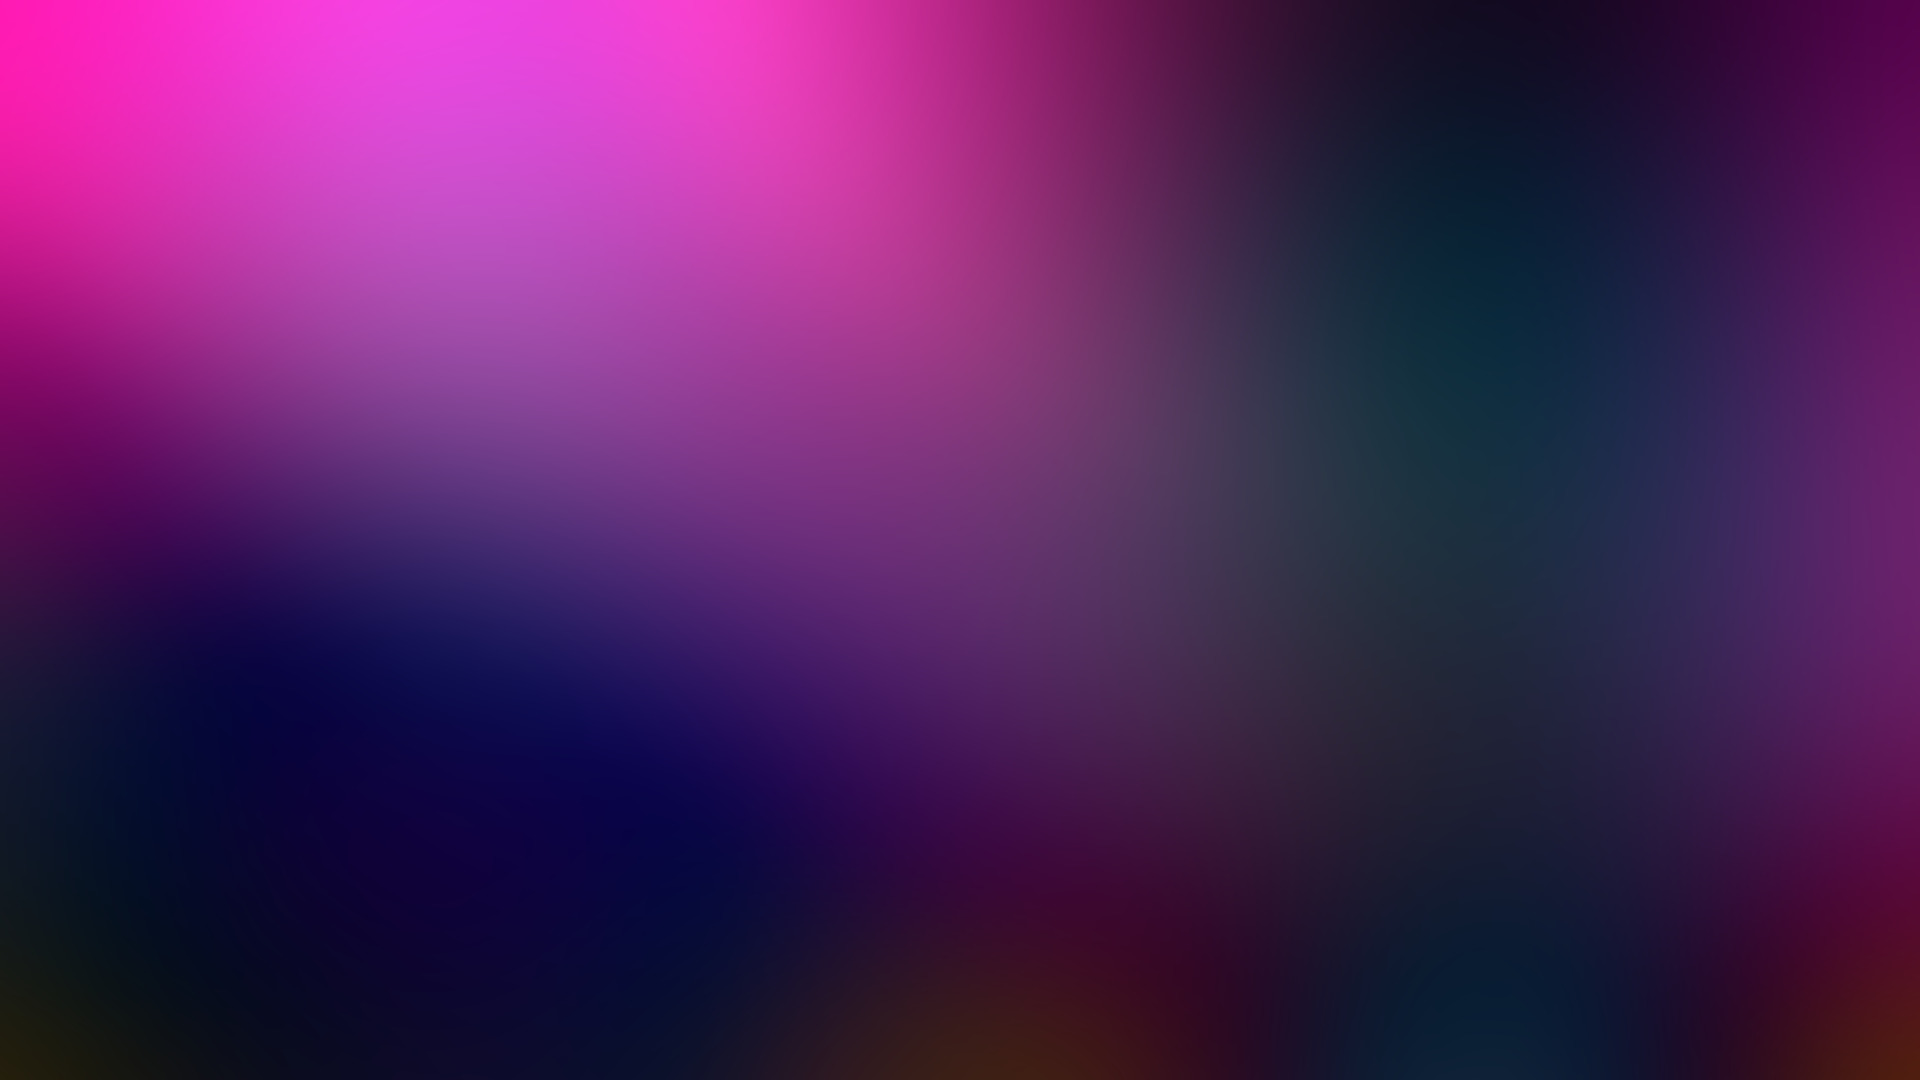 abstract, Colorful, Warm colors, Blurred, Soft gradient Wallpaper